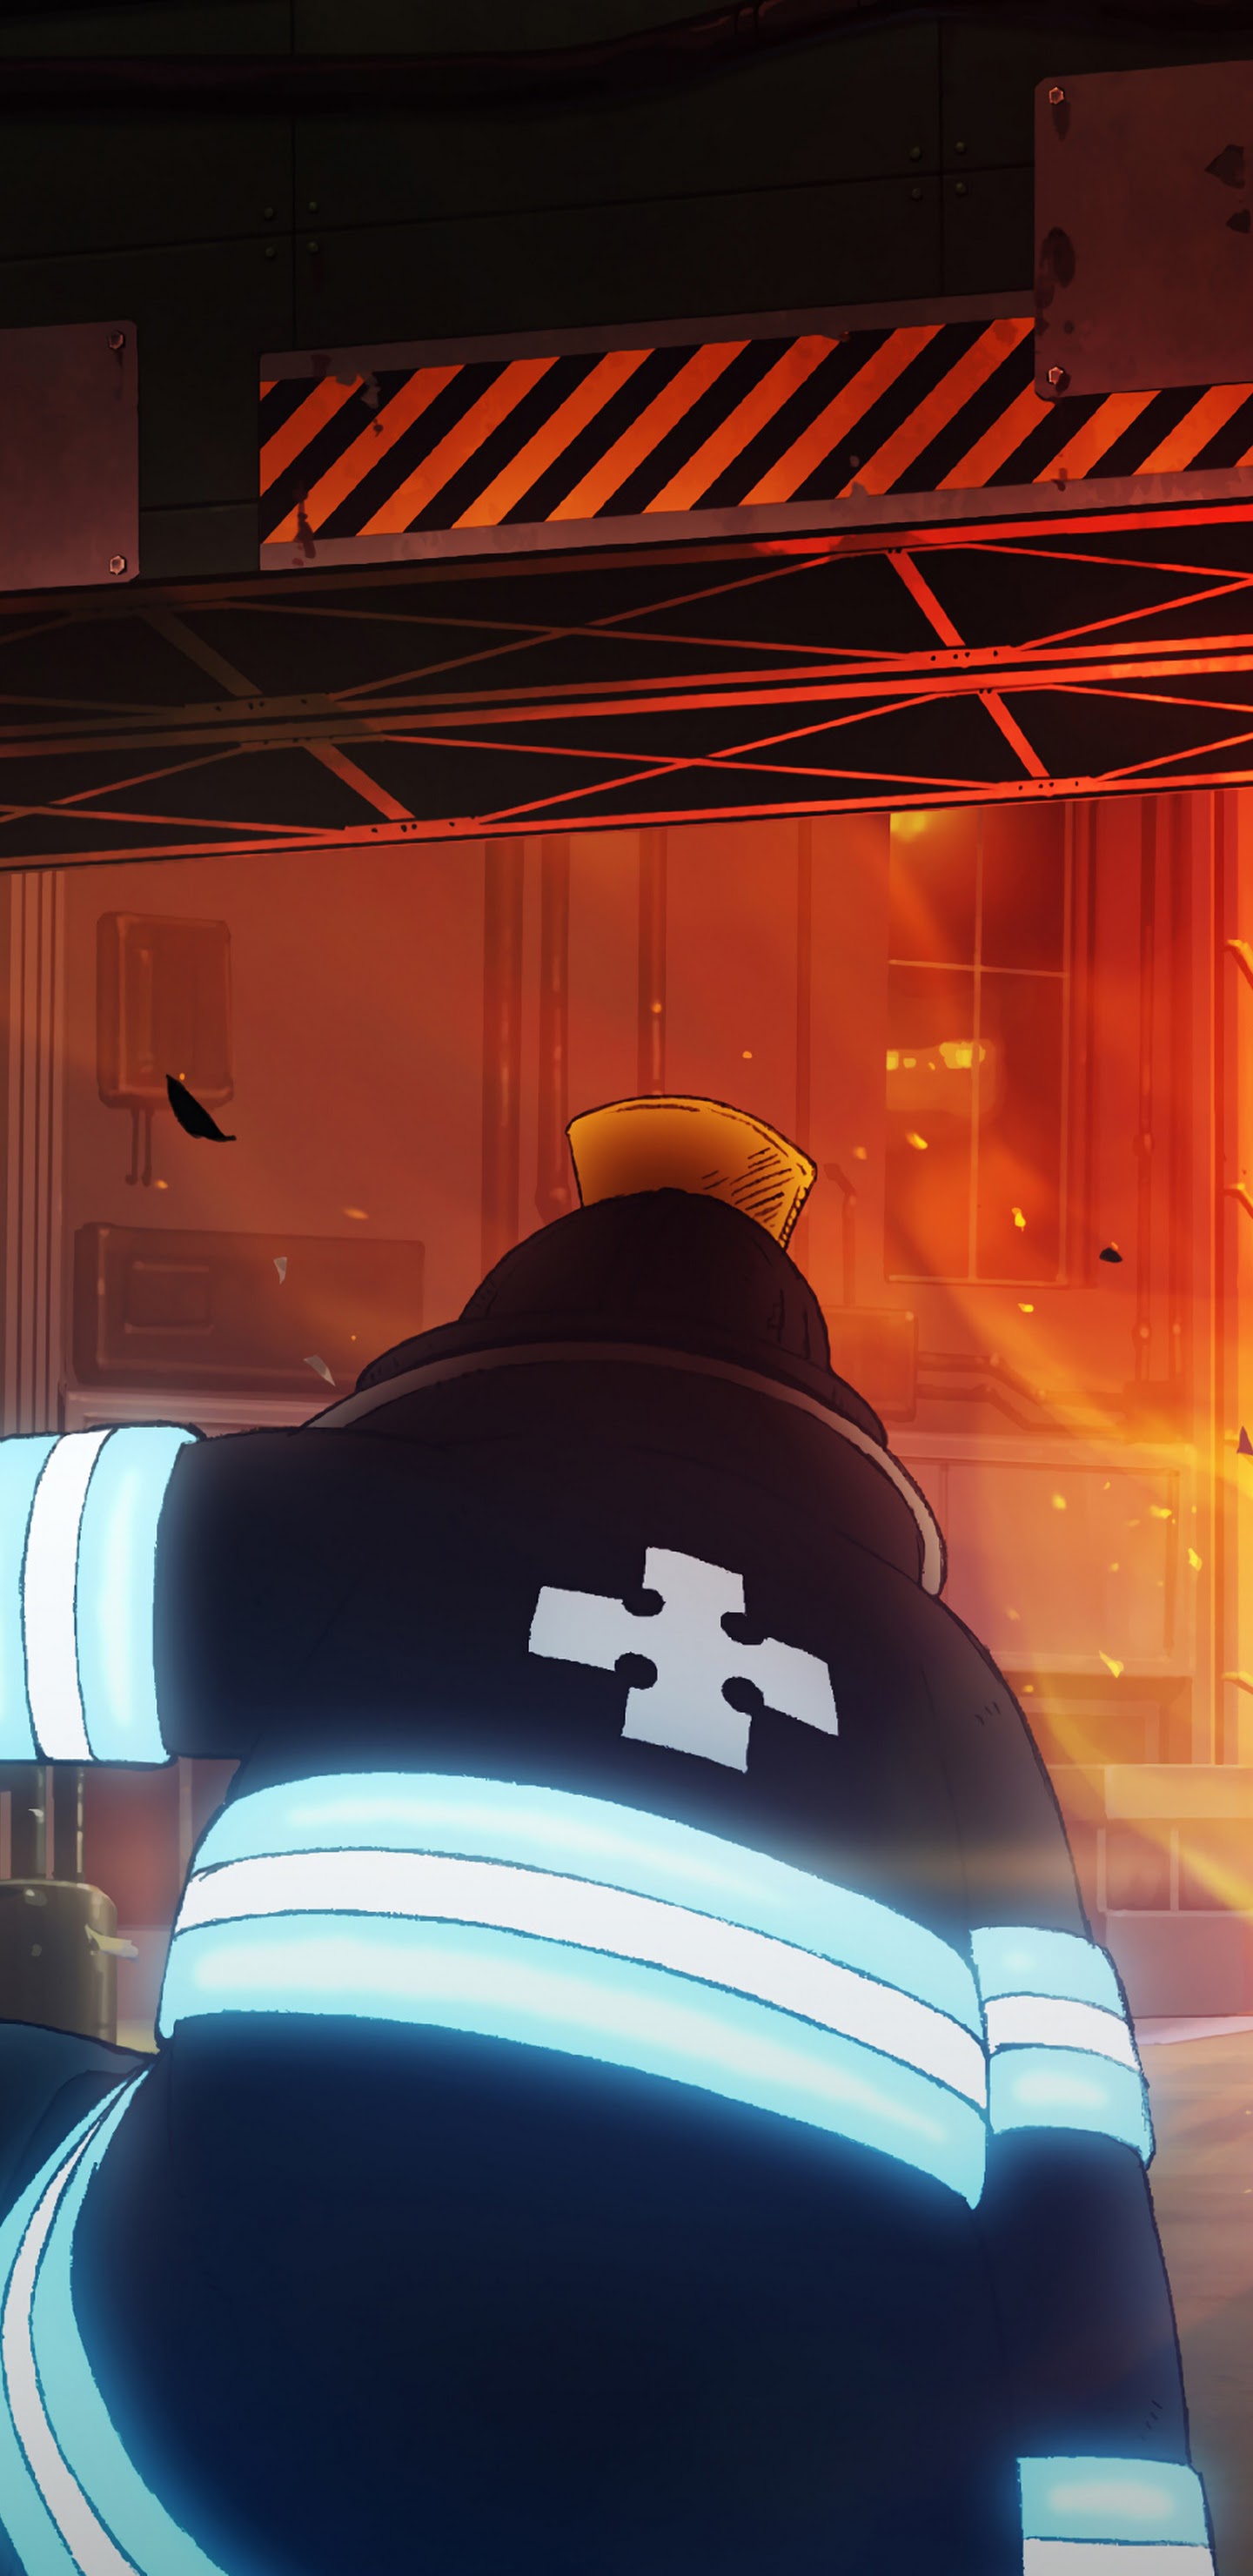 Major Differences Between The Fire Force Manga And The Anime